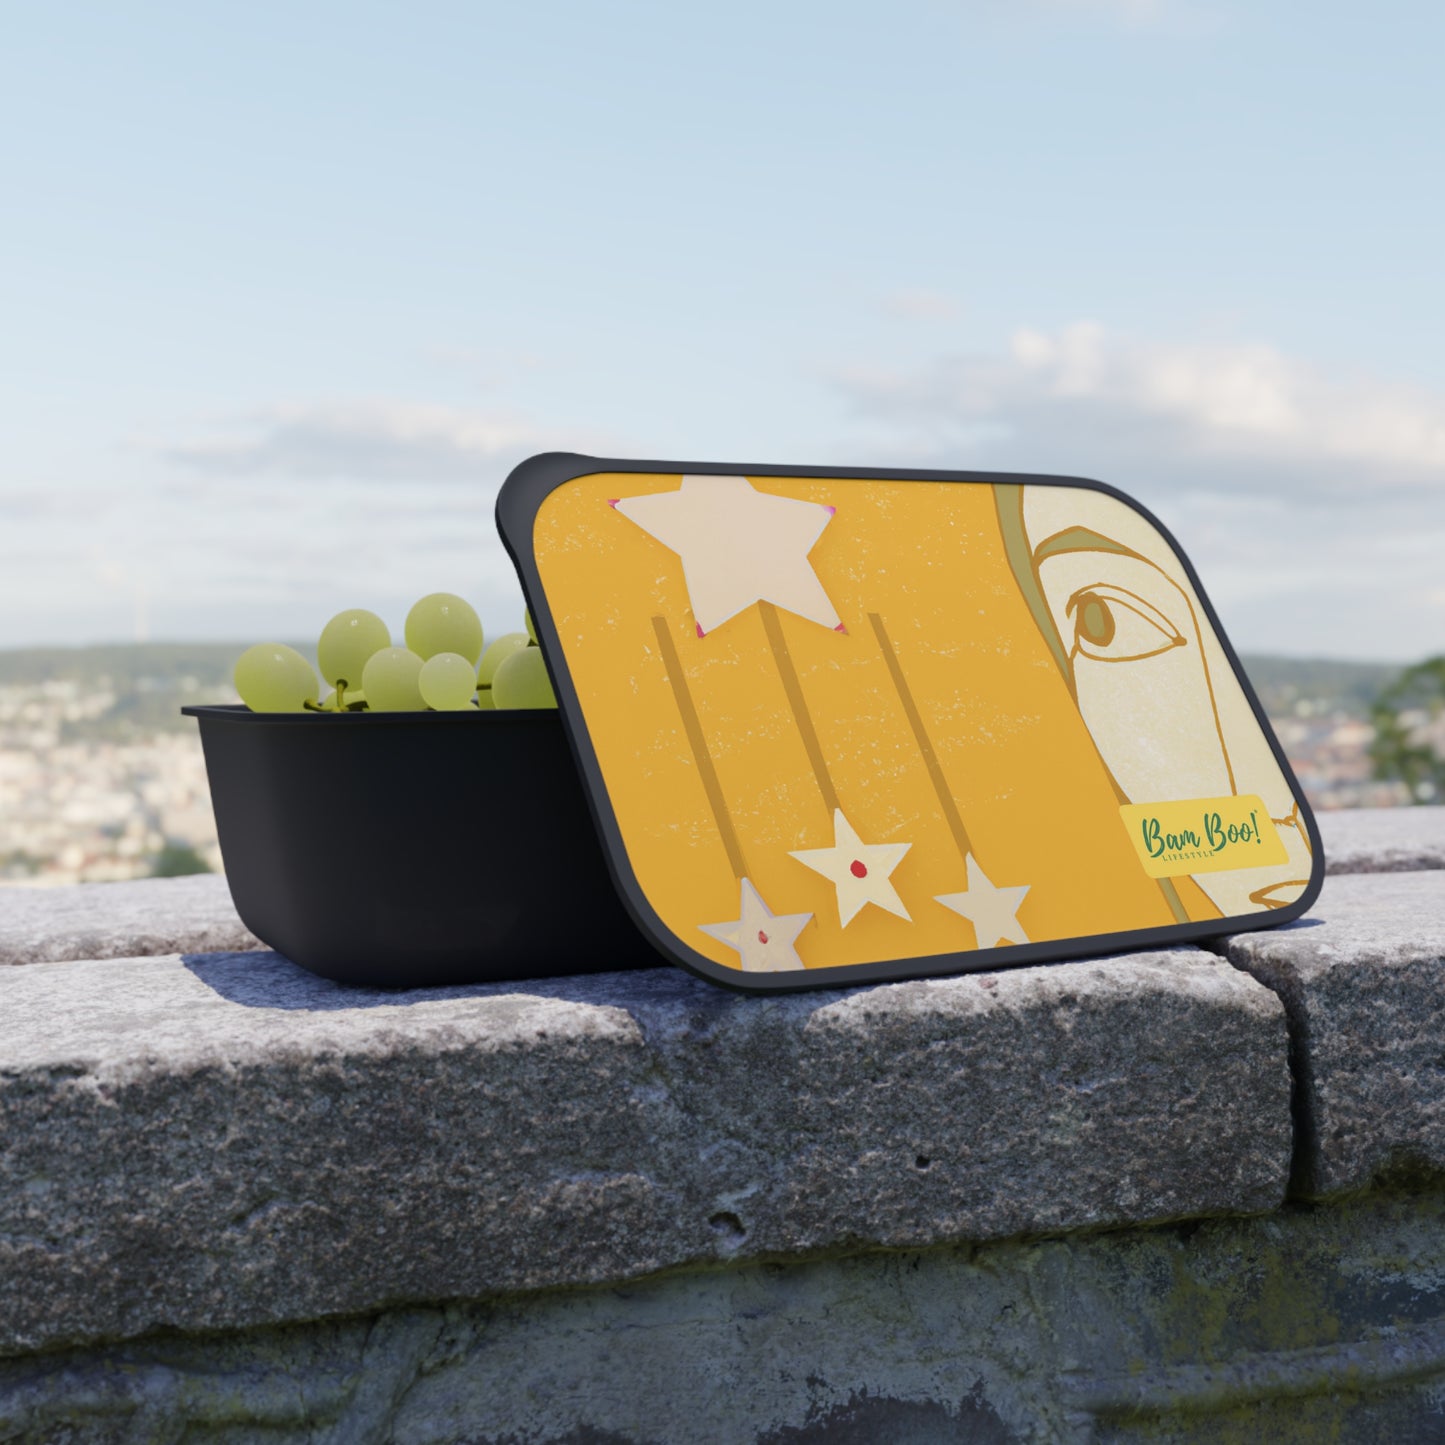 "Memories in Motion." - Bam Boo! Lifestyle Eco-friendly PLA Bento Box with Band and Utensils